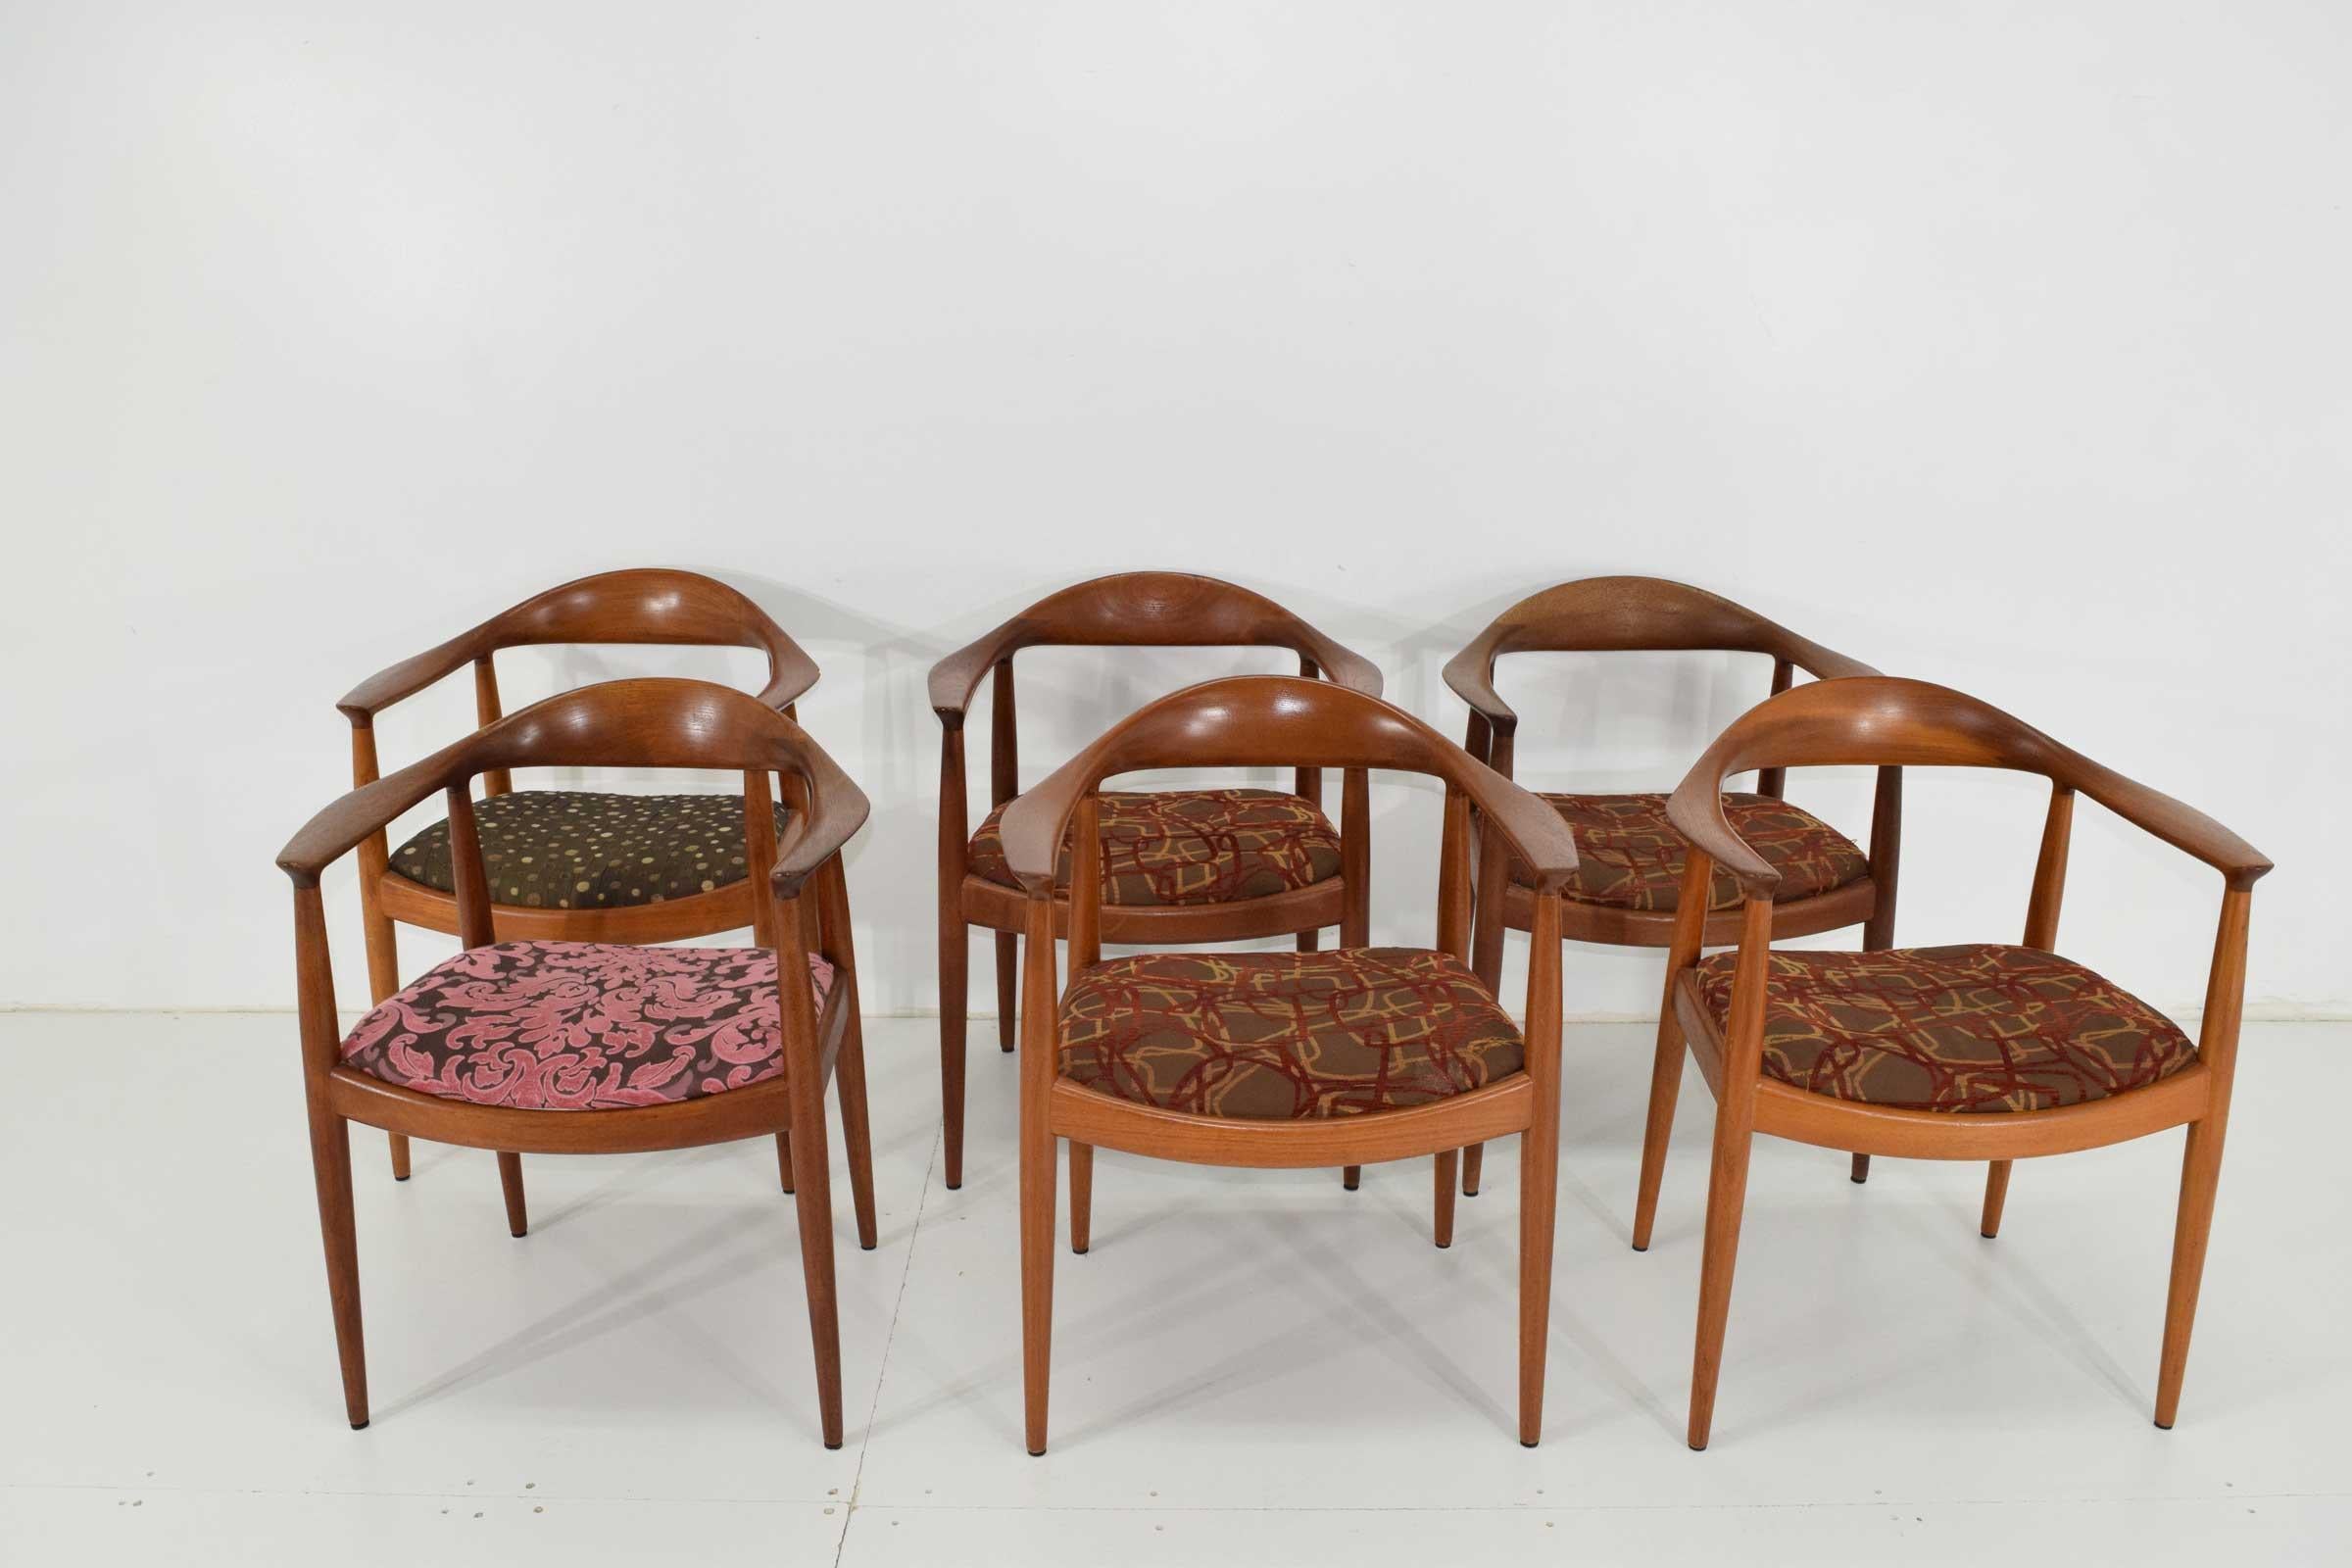 We have 6 Hans Wegner Classic round chairs often referred to as 